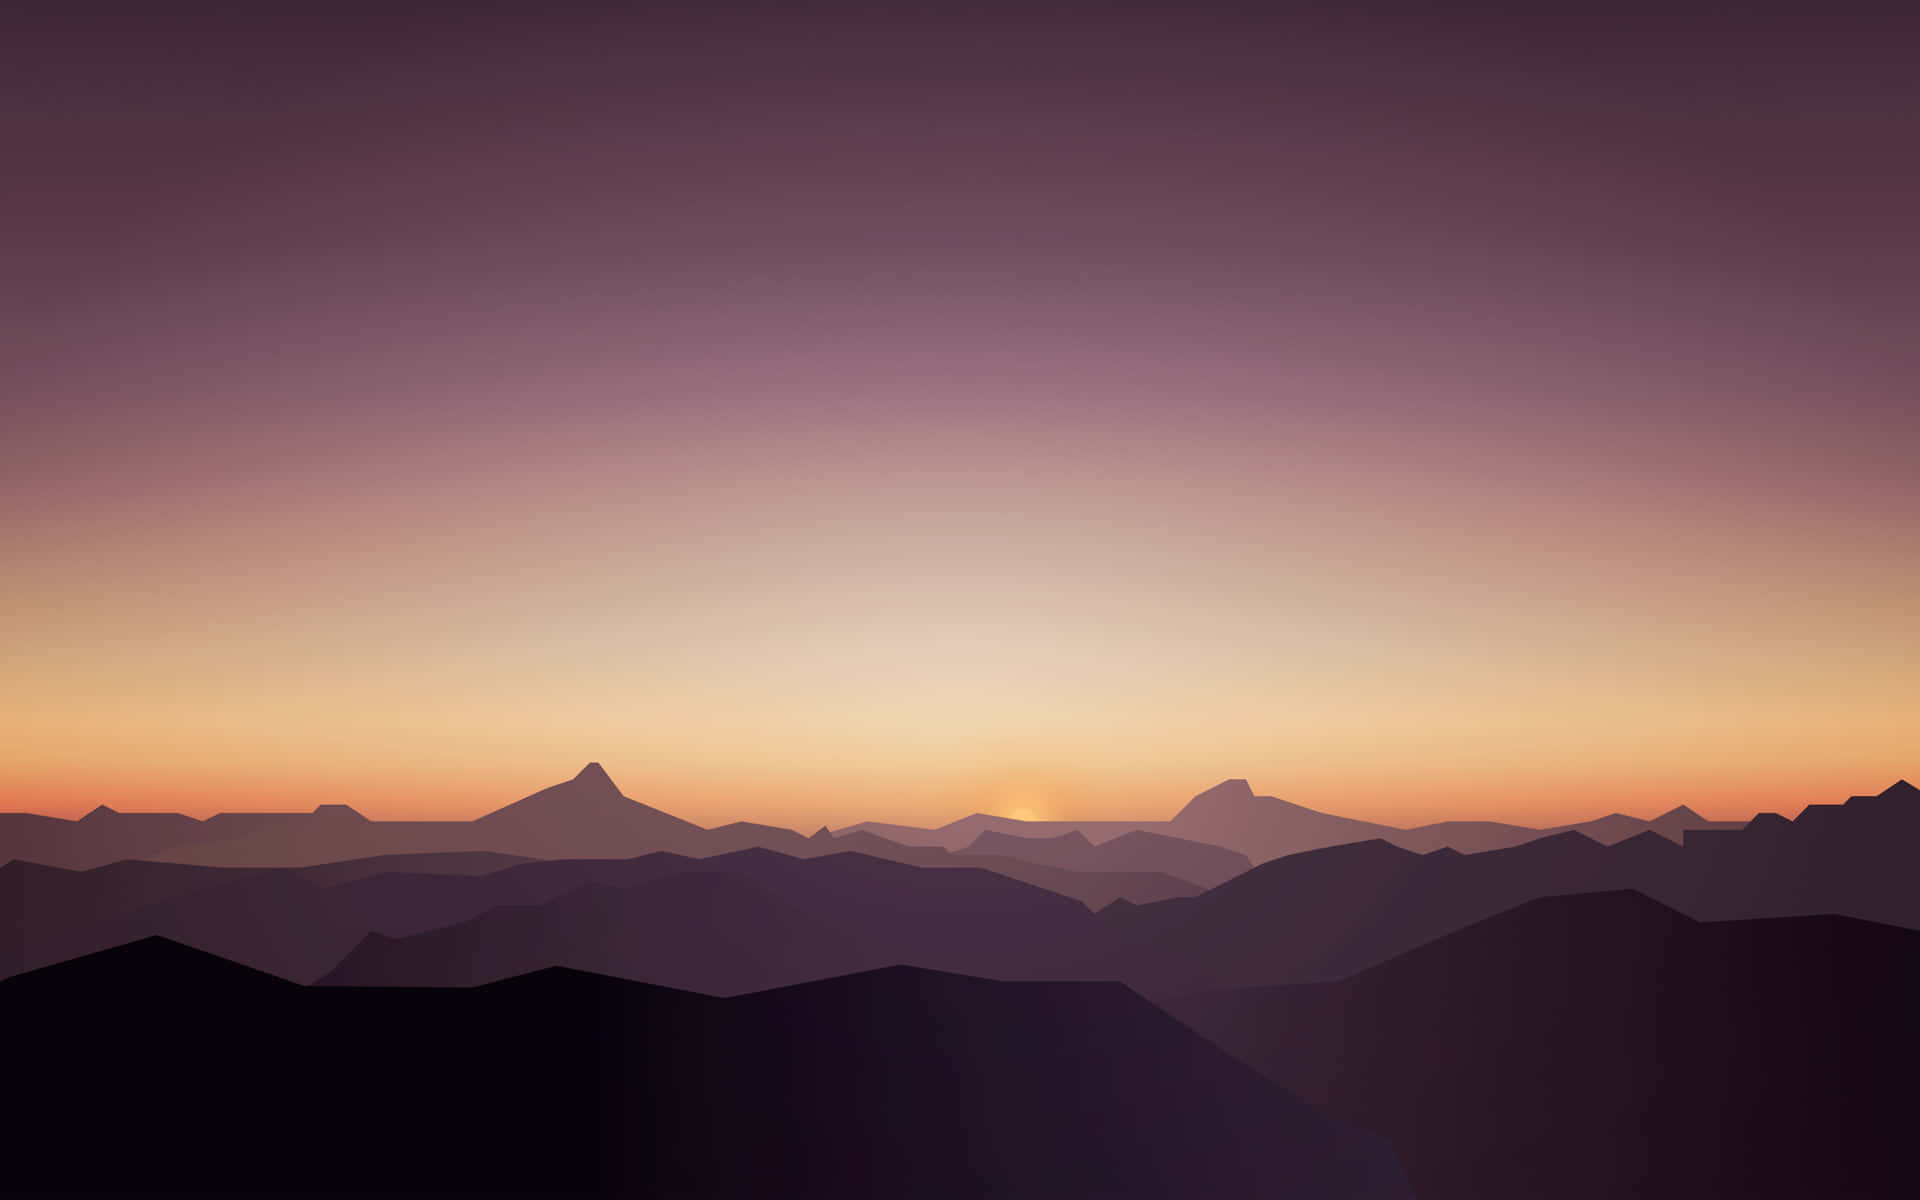 A Sunset Over Mountains With A Silhouette Of Mountains